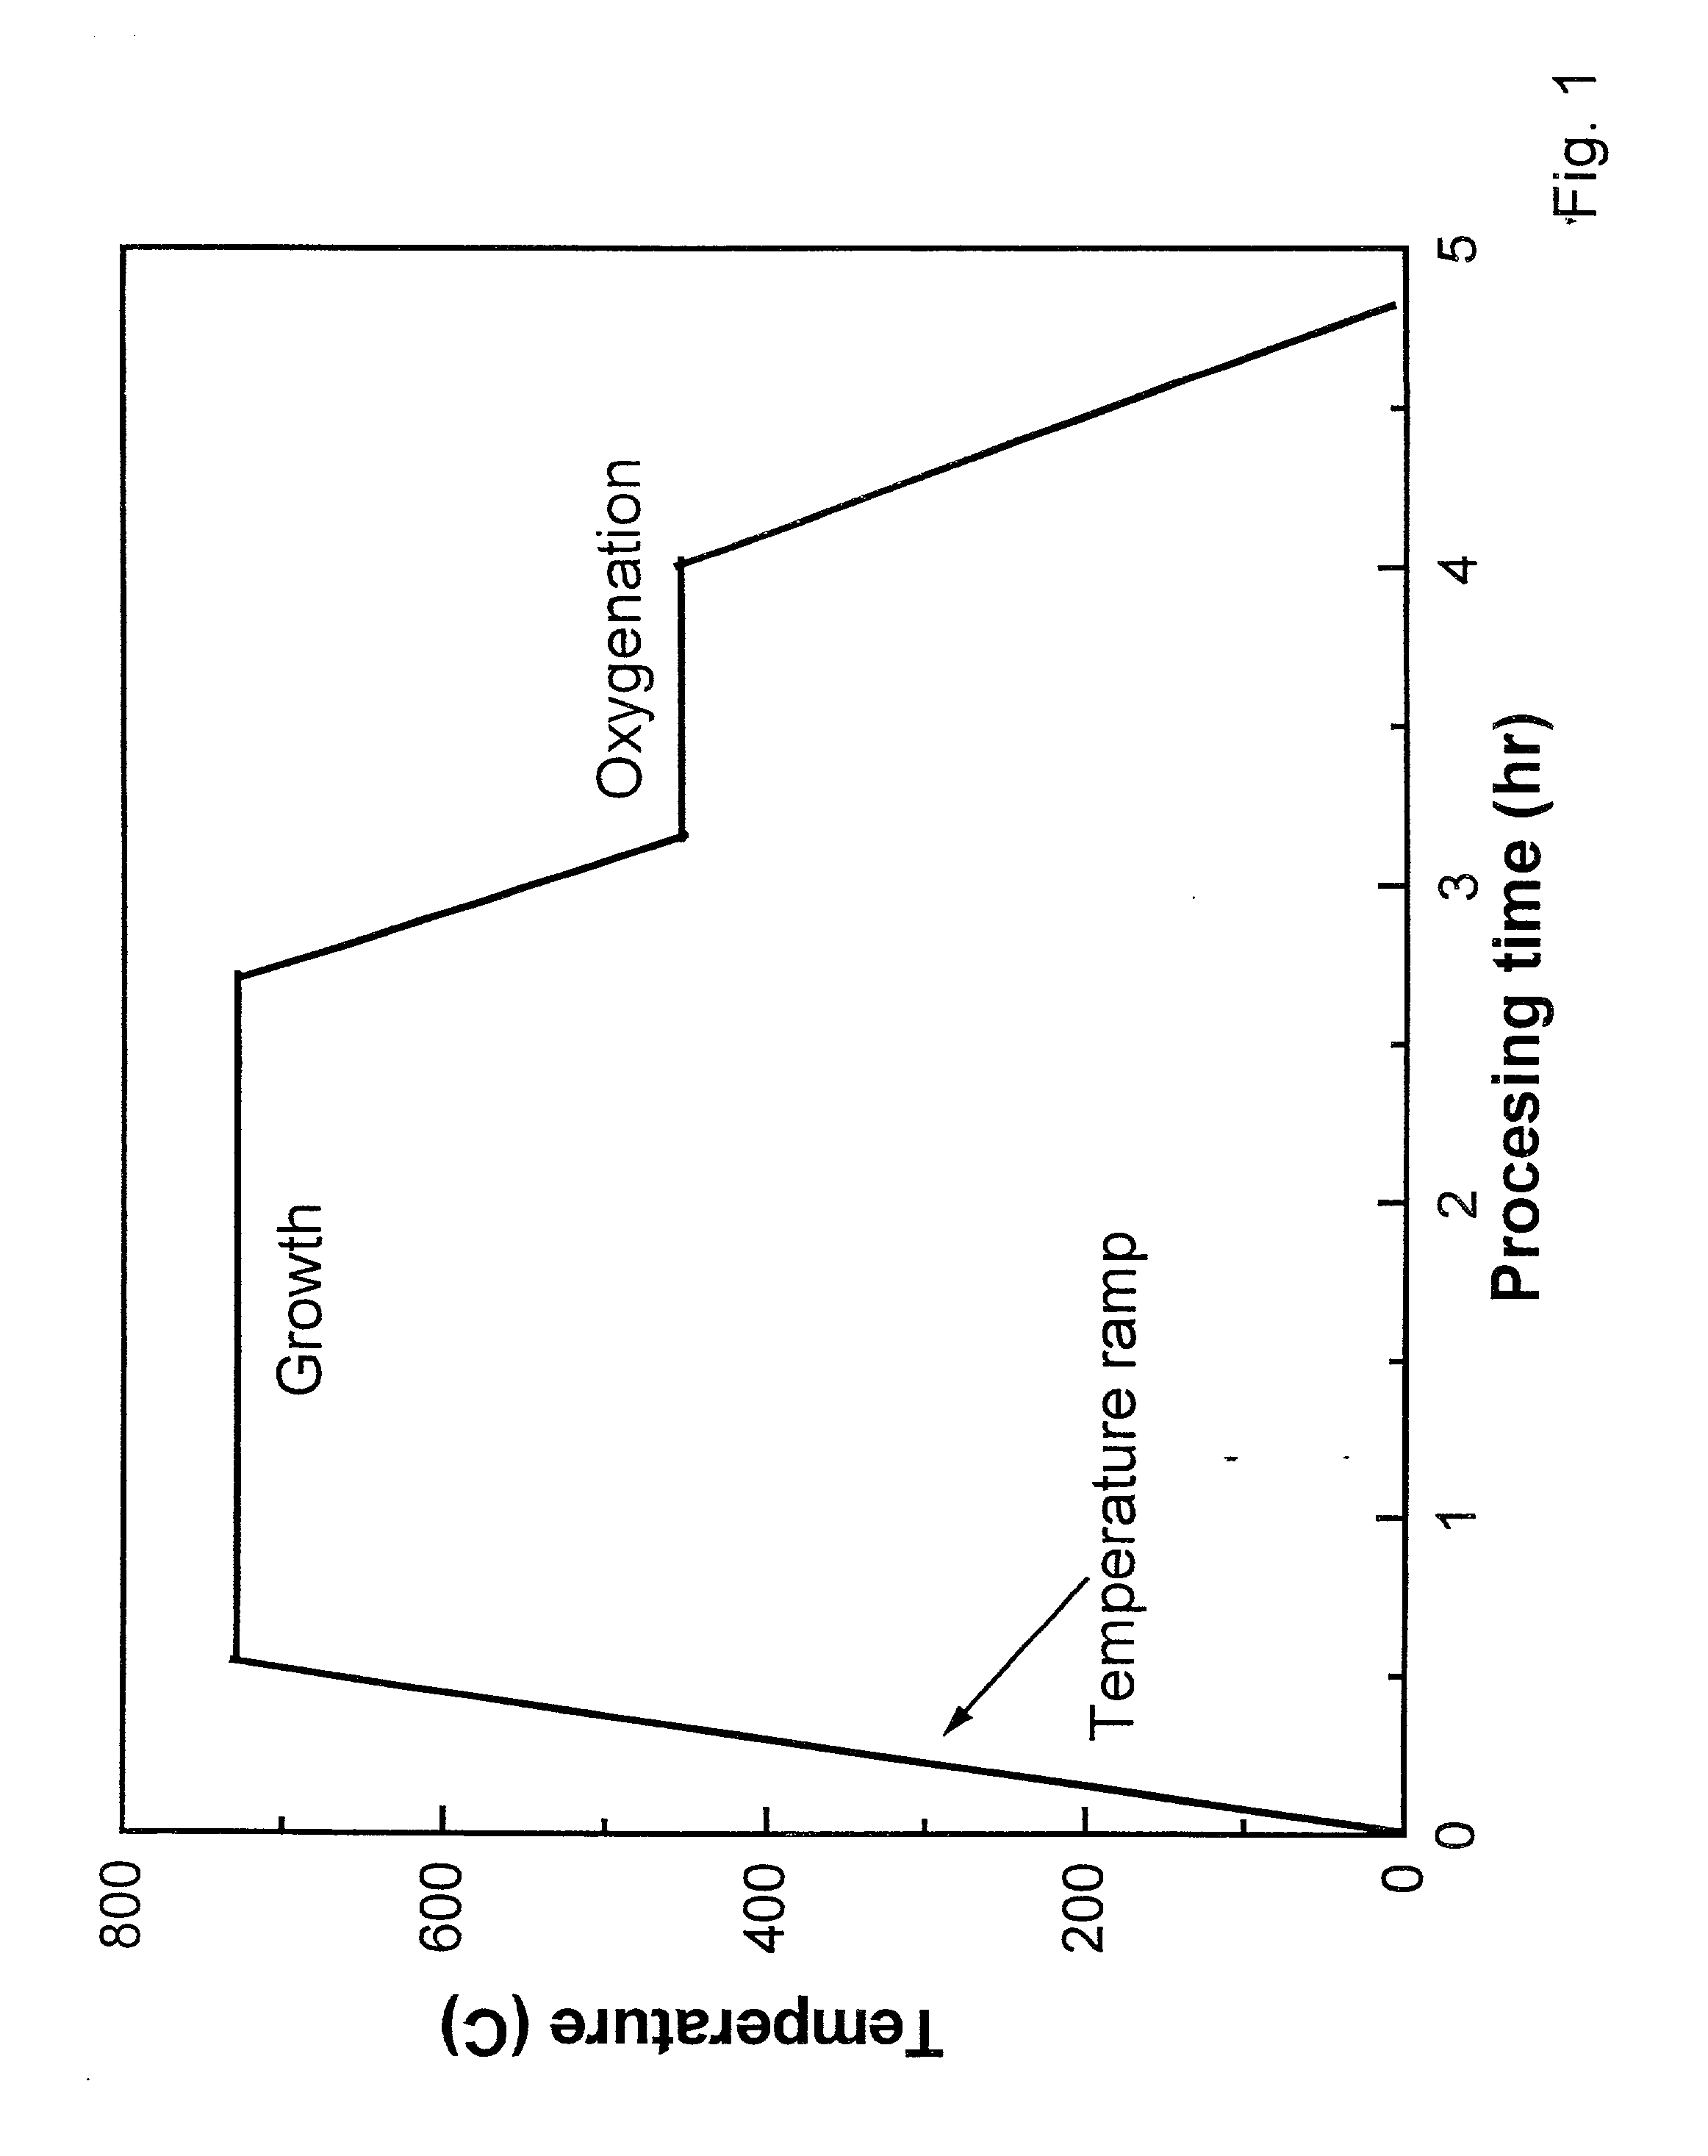 Synthesis of YBa2Cu3O7 using sub-atmospheric processing